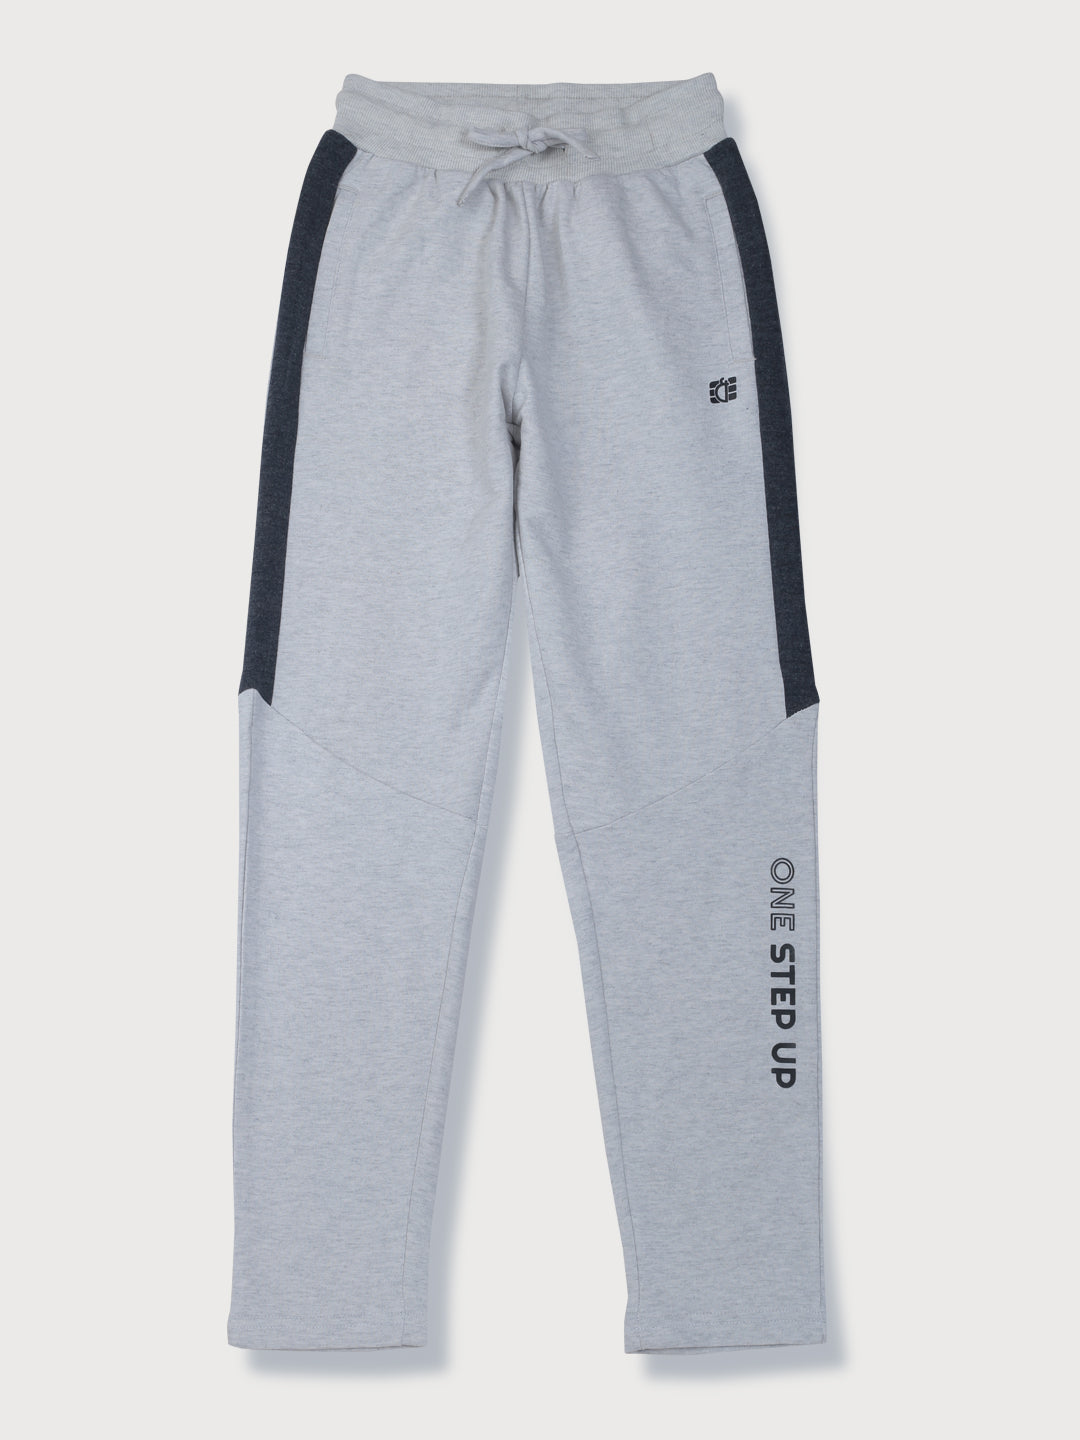 Boys Grey Solid Cotton Track Pant